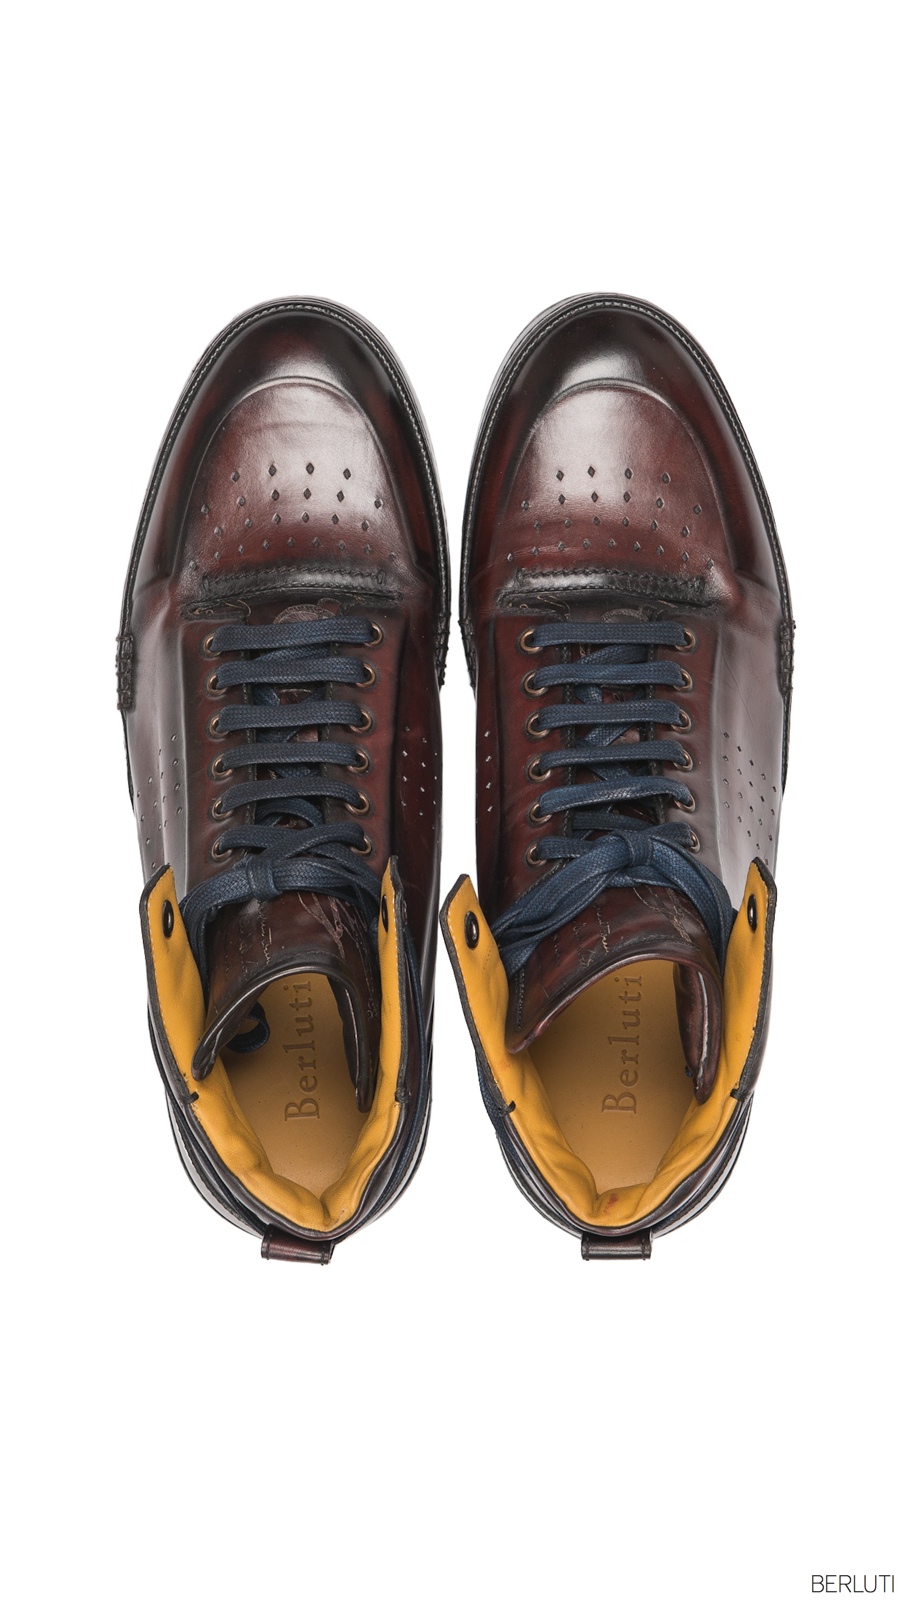 Berluti Introduces 'Playtime' Sneaker – The Fashionisto